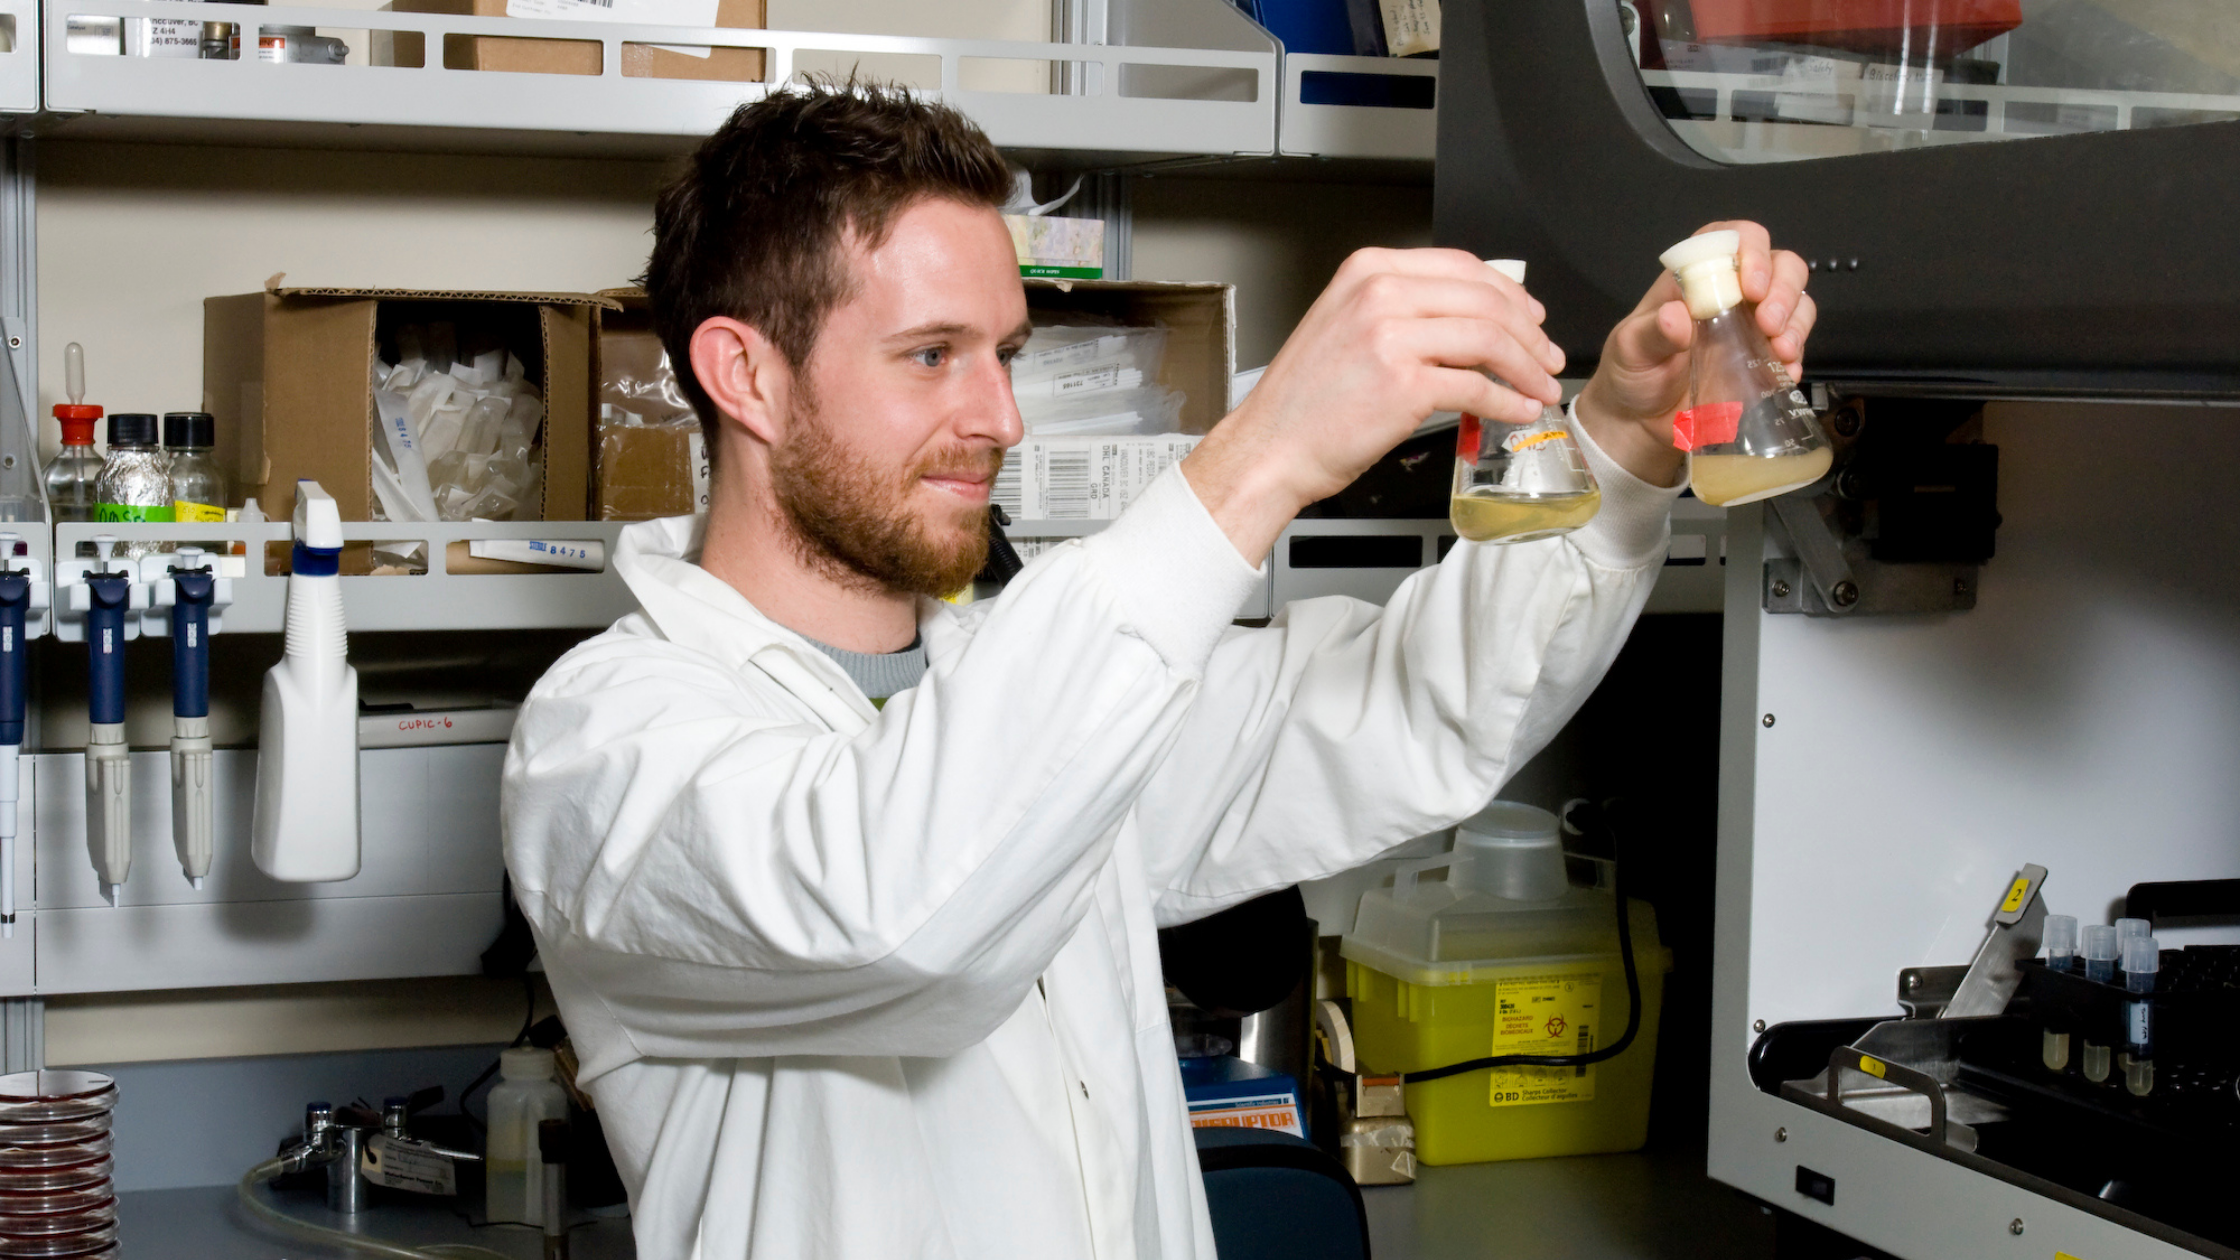 CF Canada researcher holding up two test tubes